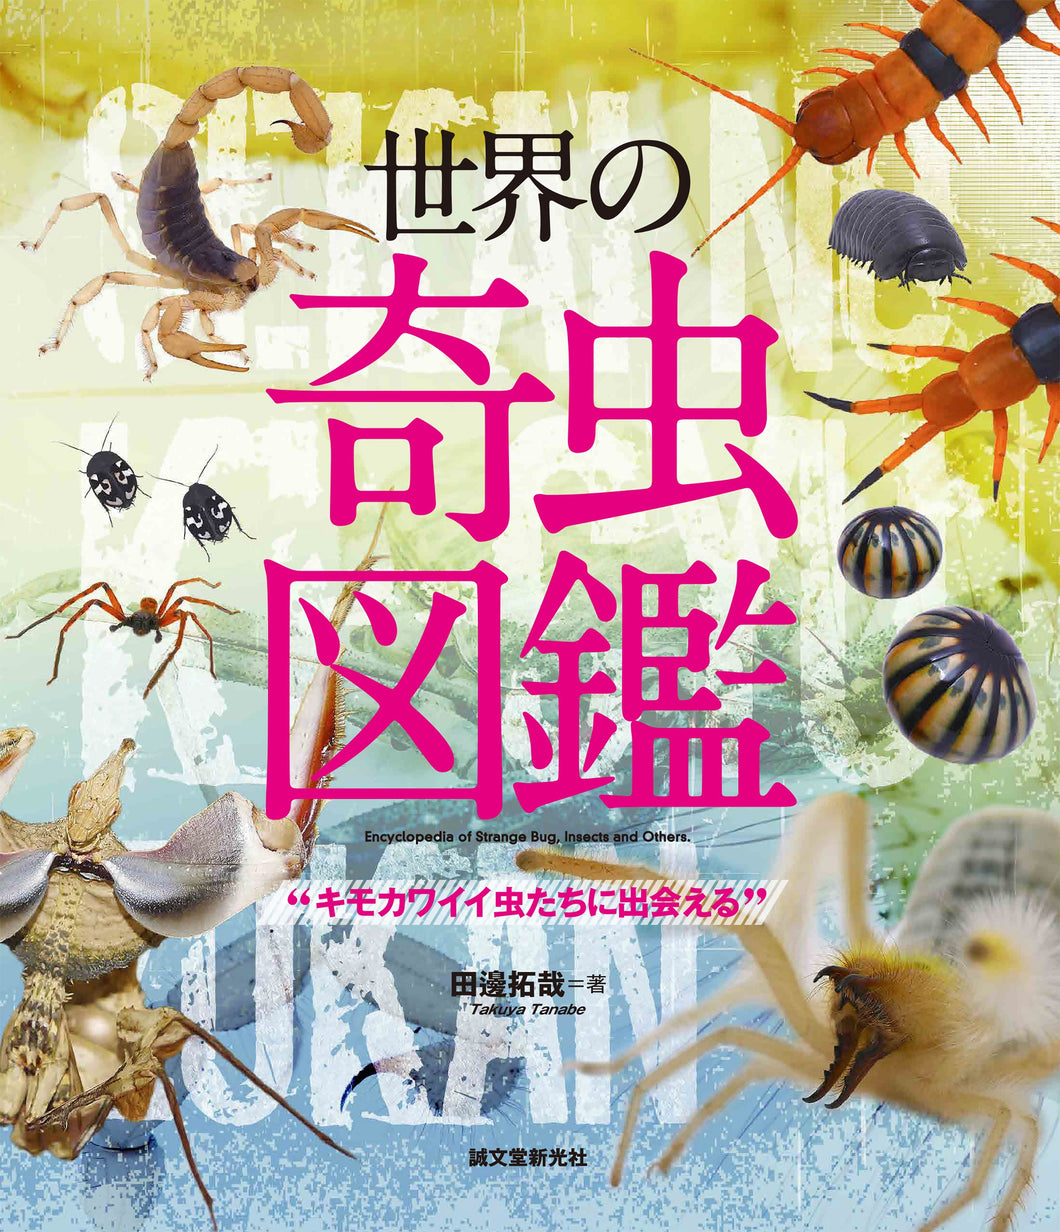 Encyclopedia of strange insects in the world